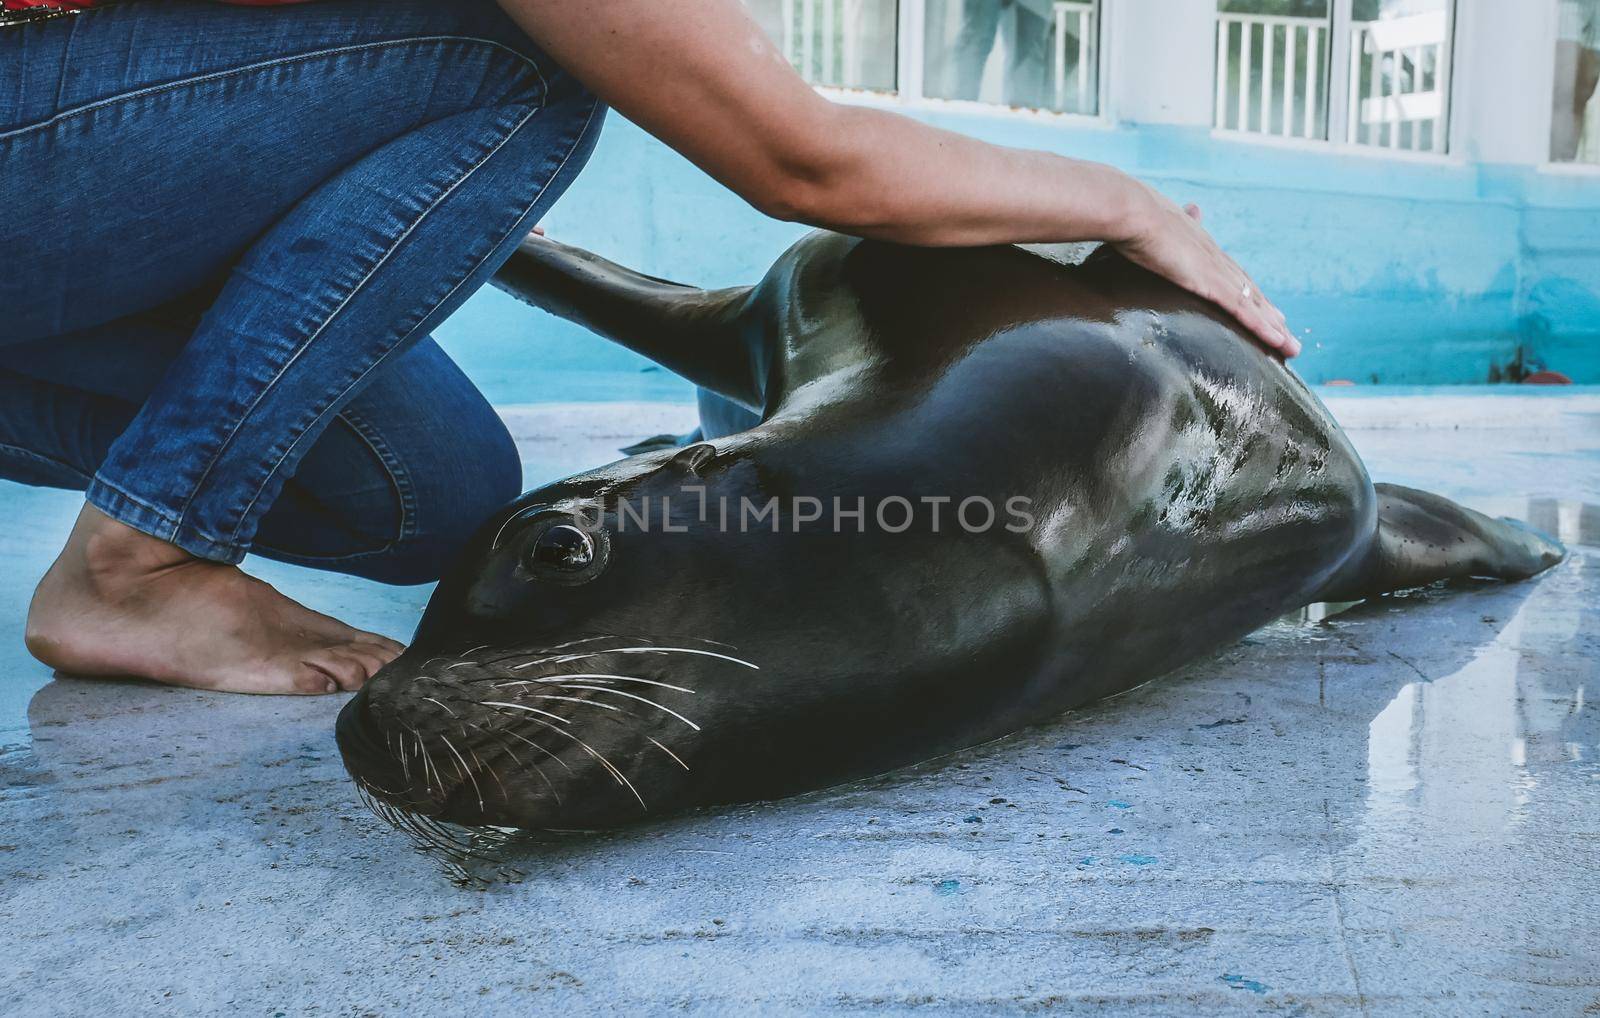 Veterinarian training of South American sea lion in zoo by RosaJay